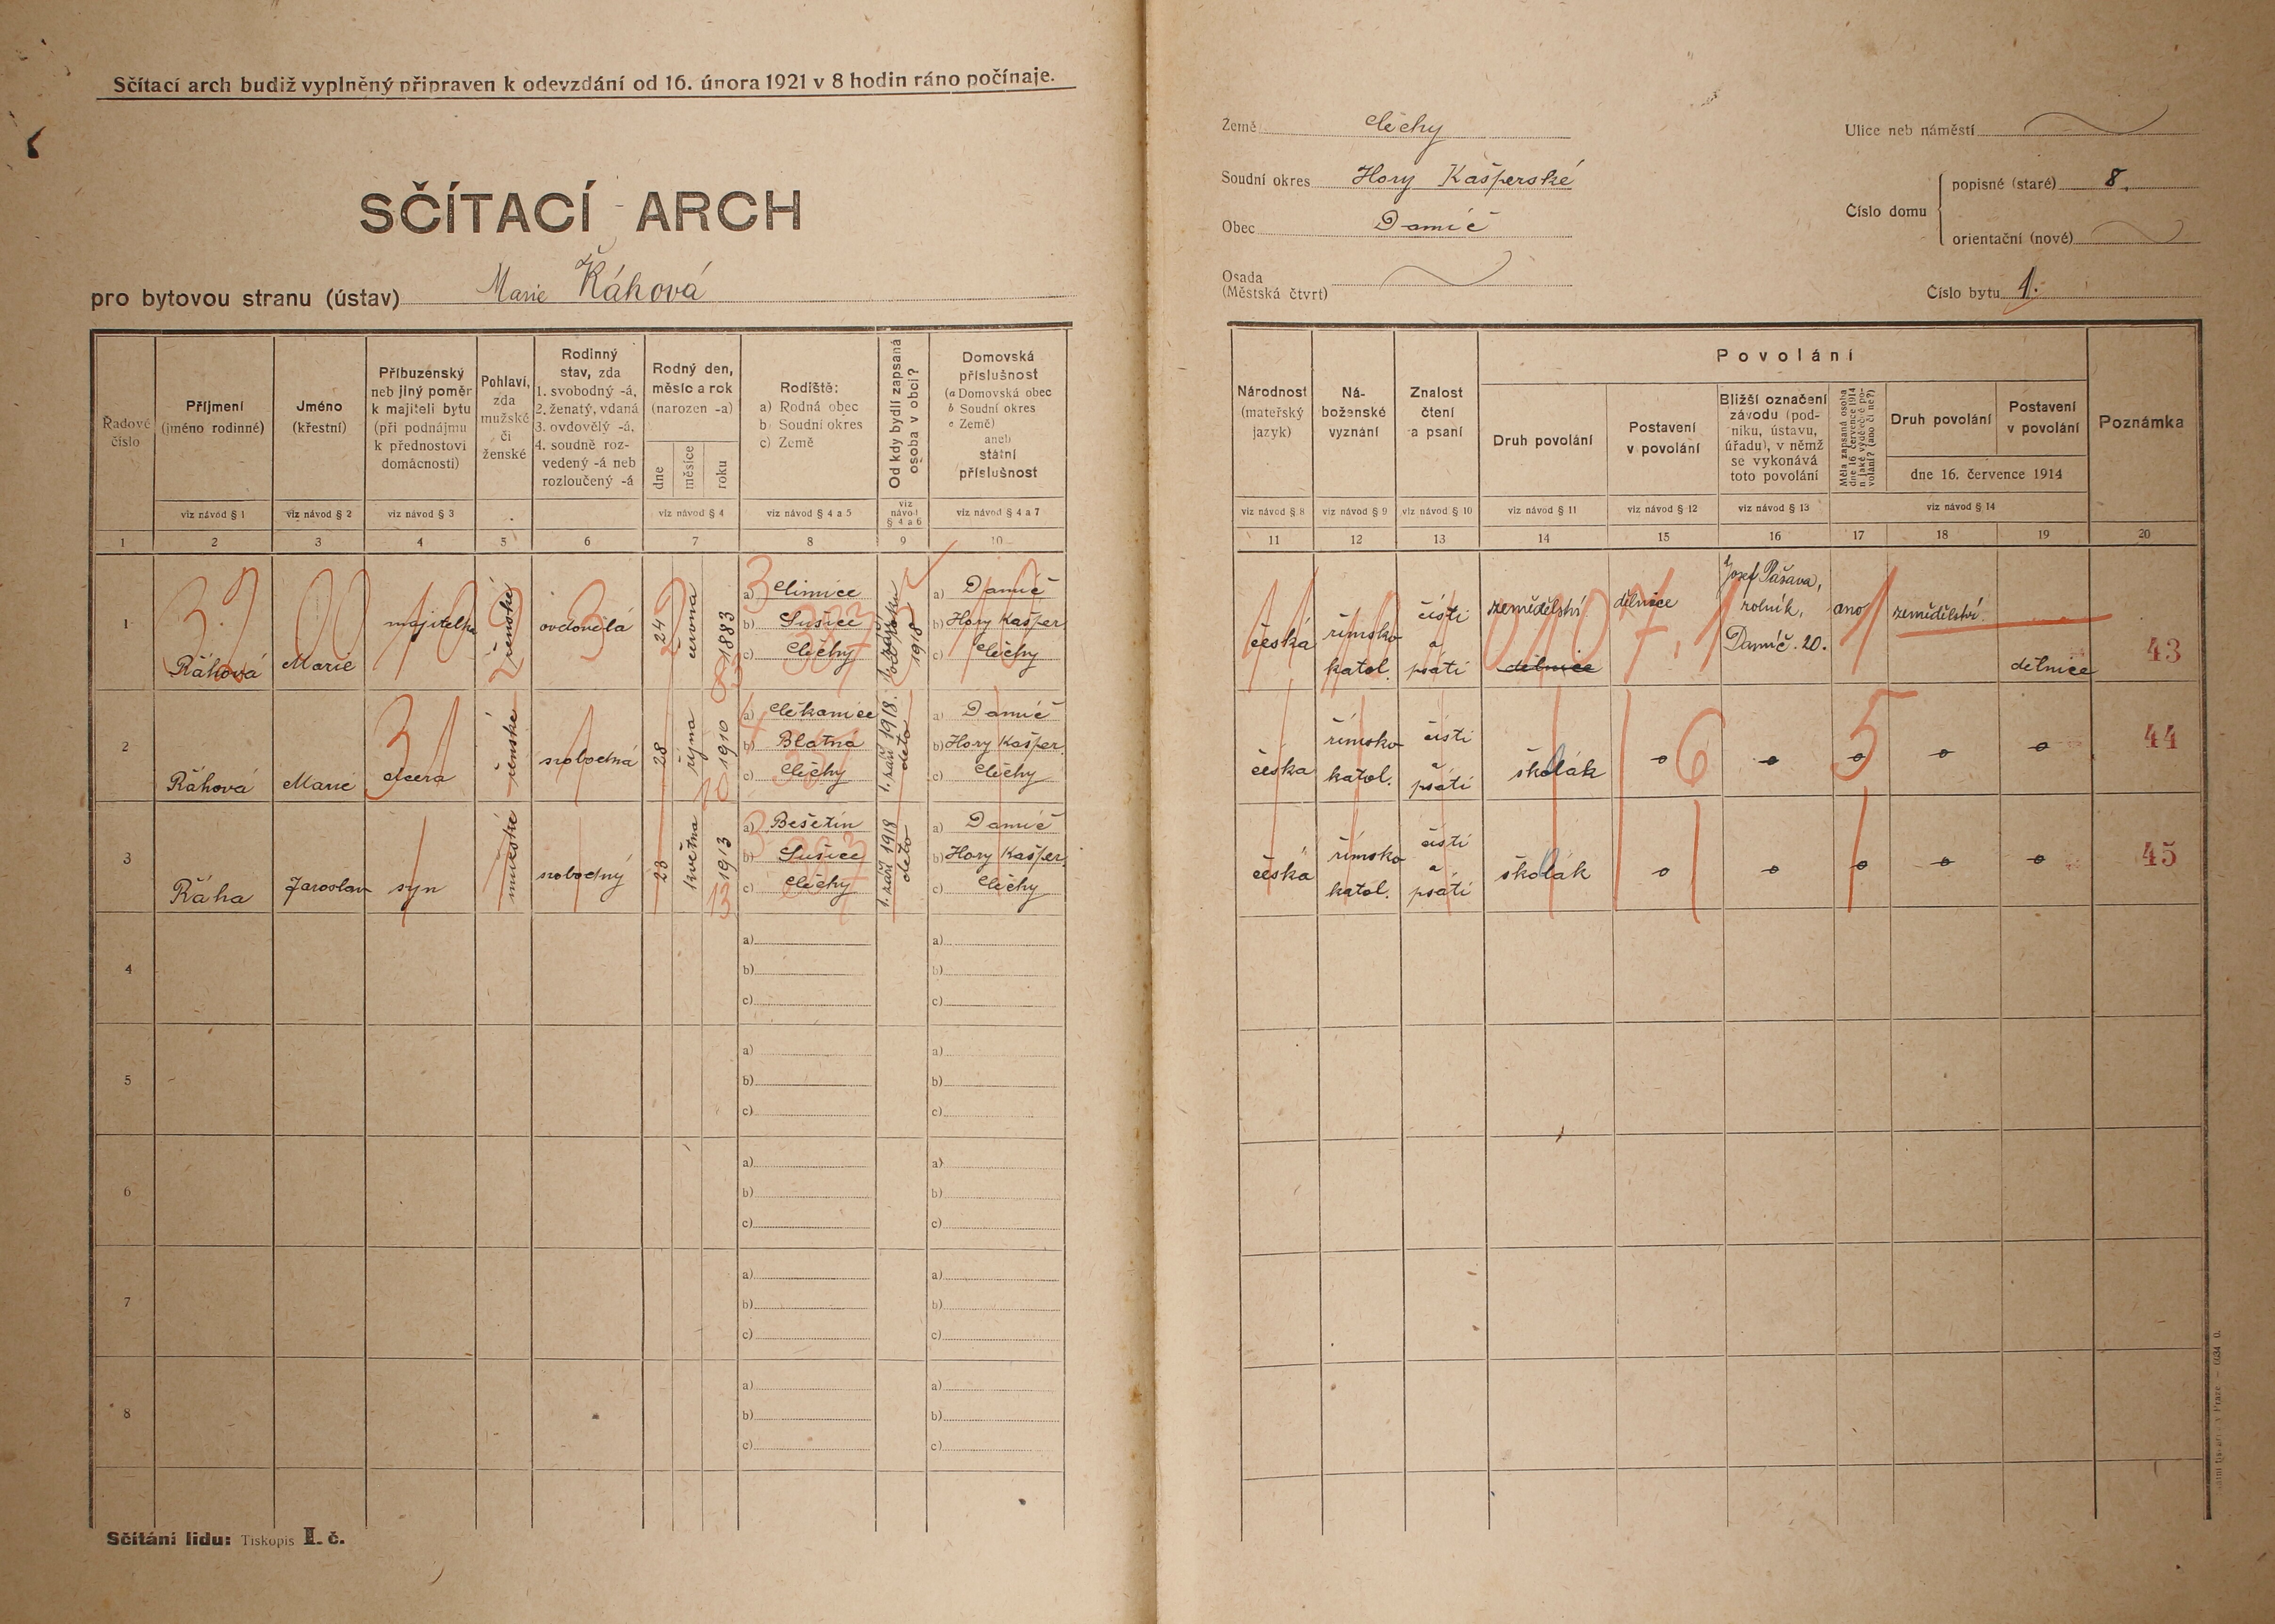 2. soap-kt_01159_census-1921-damic-cp008_0020